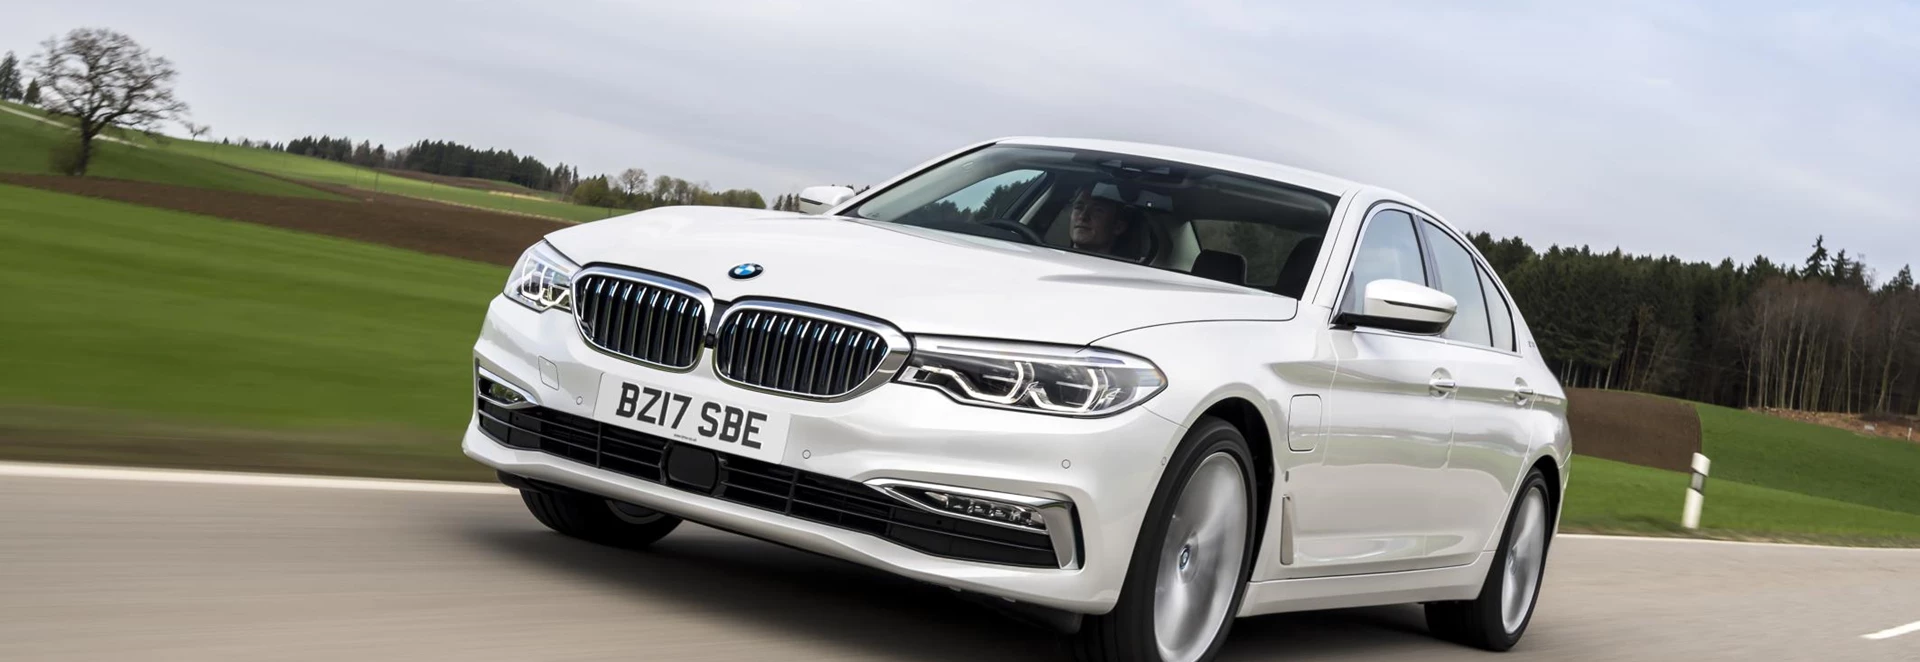 Diesel BMW owners offered £2,000 to swap their car 